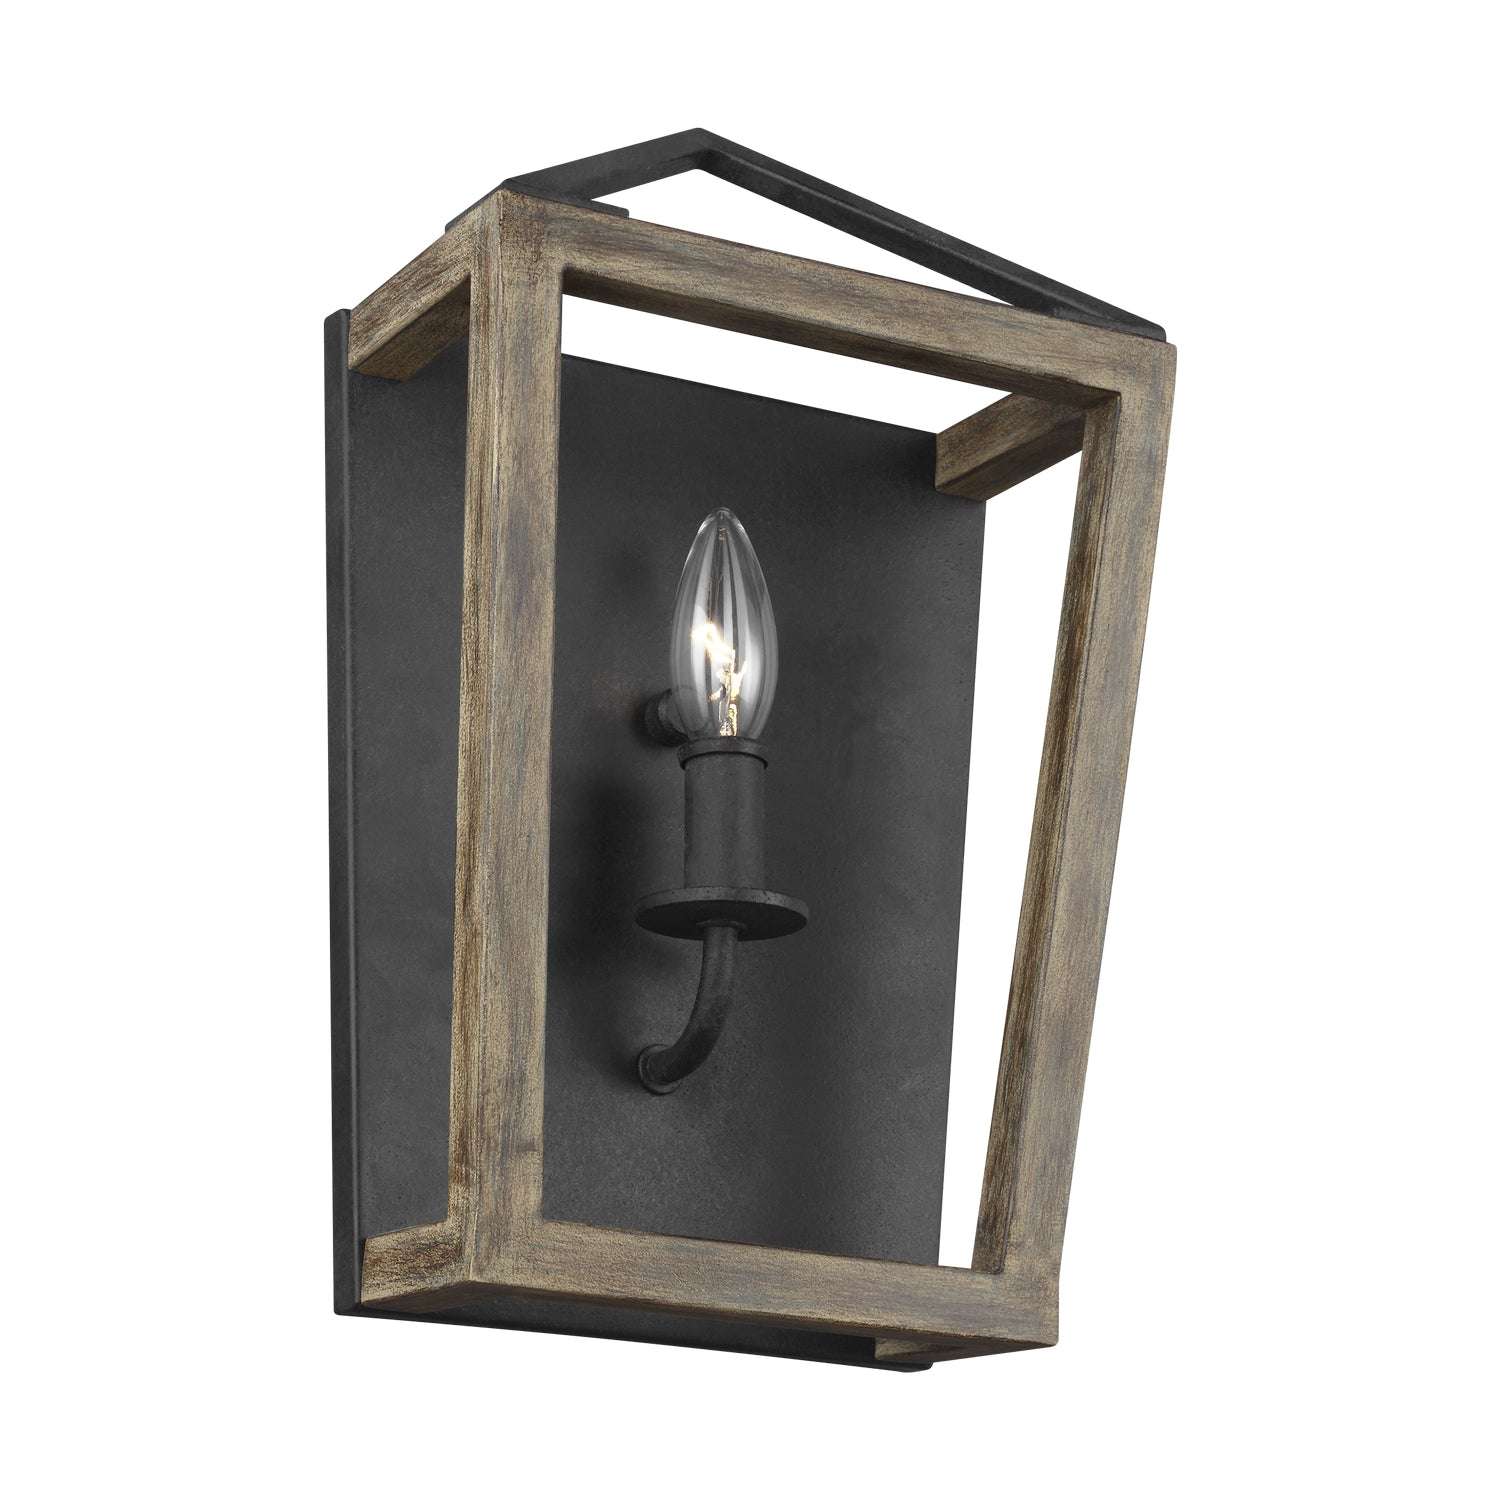 Visual Comfort Studio Canada - WB1877WOW/AF - One Light Wall Sconce - Gannet - Weathered Oak Wood / Antique Forged Iron